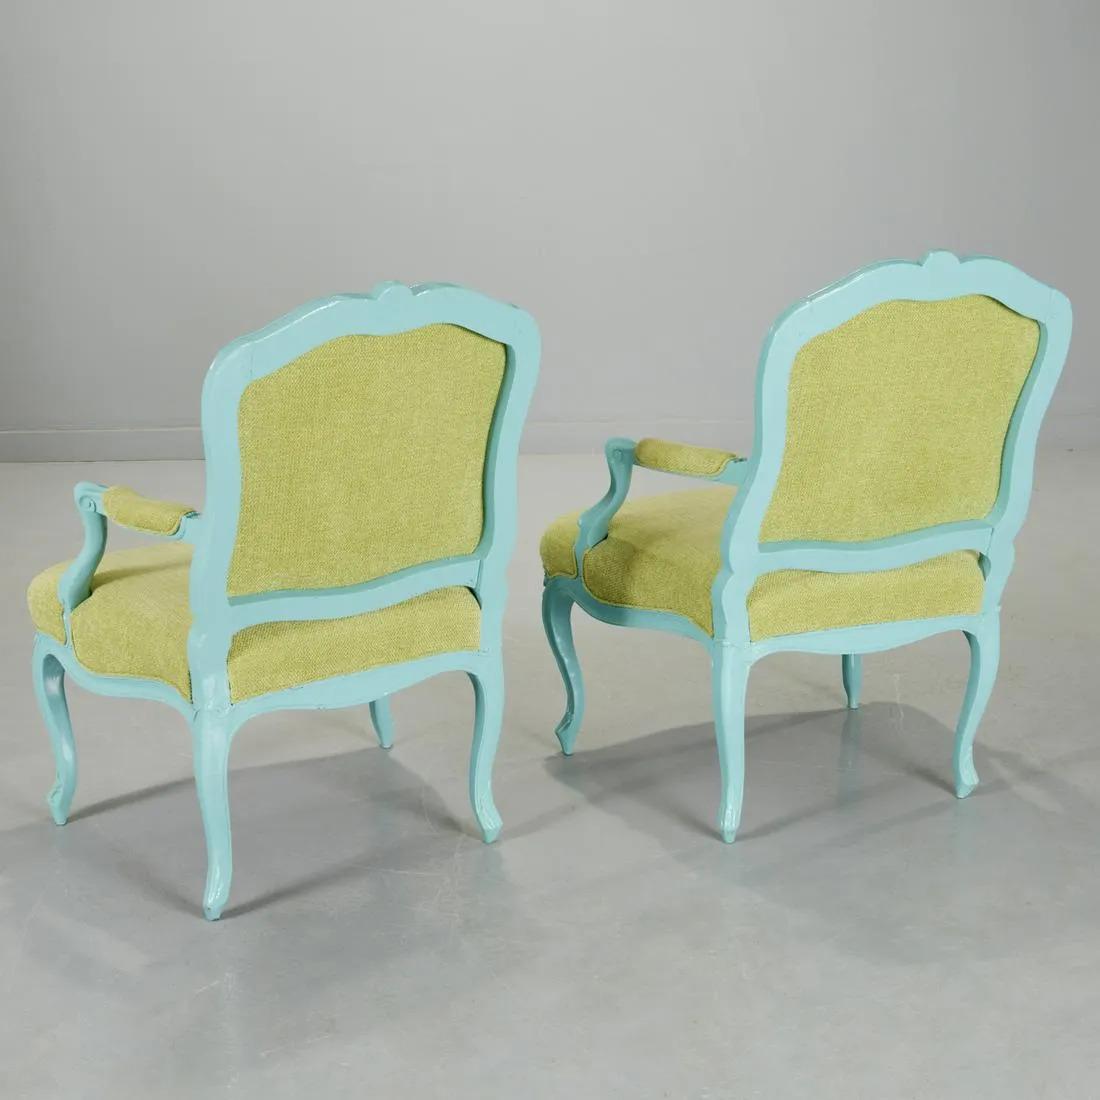 Pair Louis XIV style turquoise painted armchairs. The chairs have thick lacquer over walnut frames, velvet upholstery with Cabriole legs.